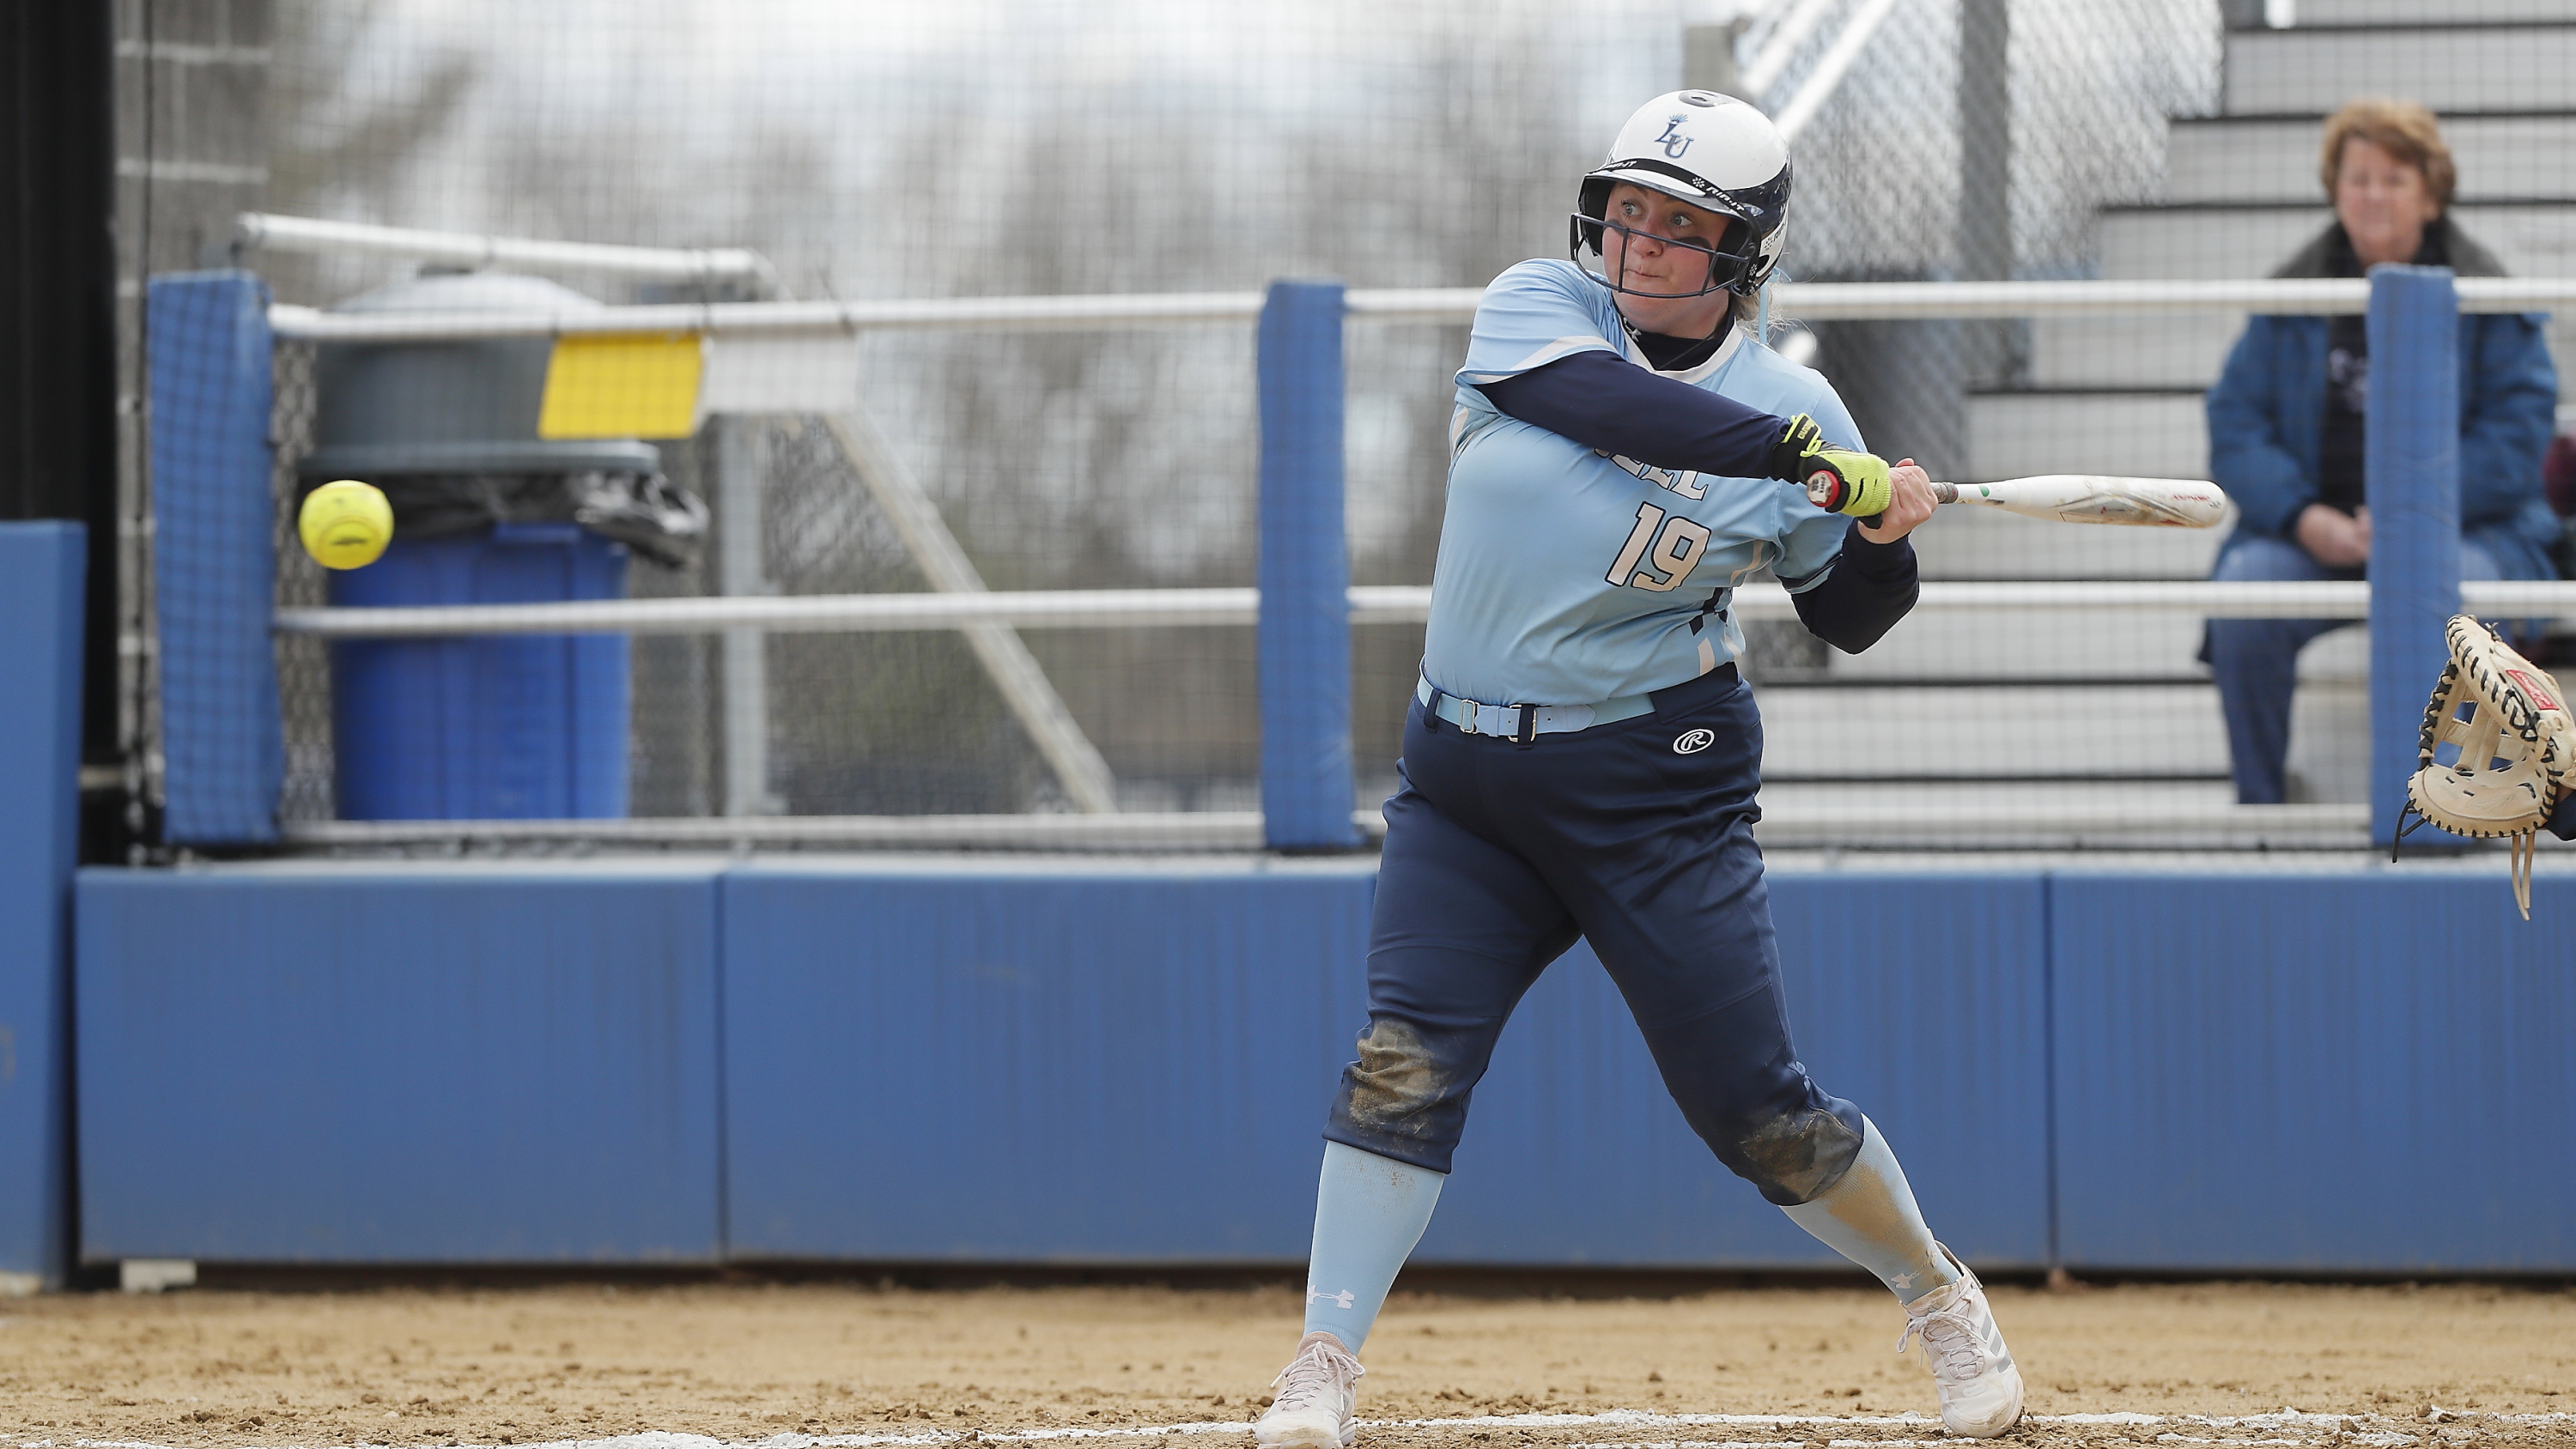 Softball: Hot bats in game one lead Lasell to split with Fitchburg State